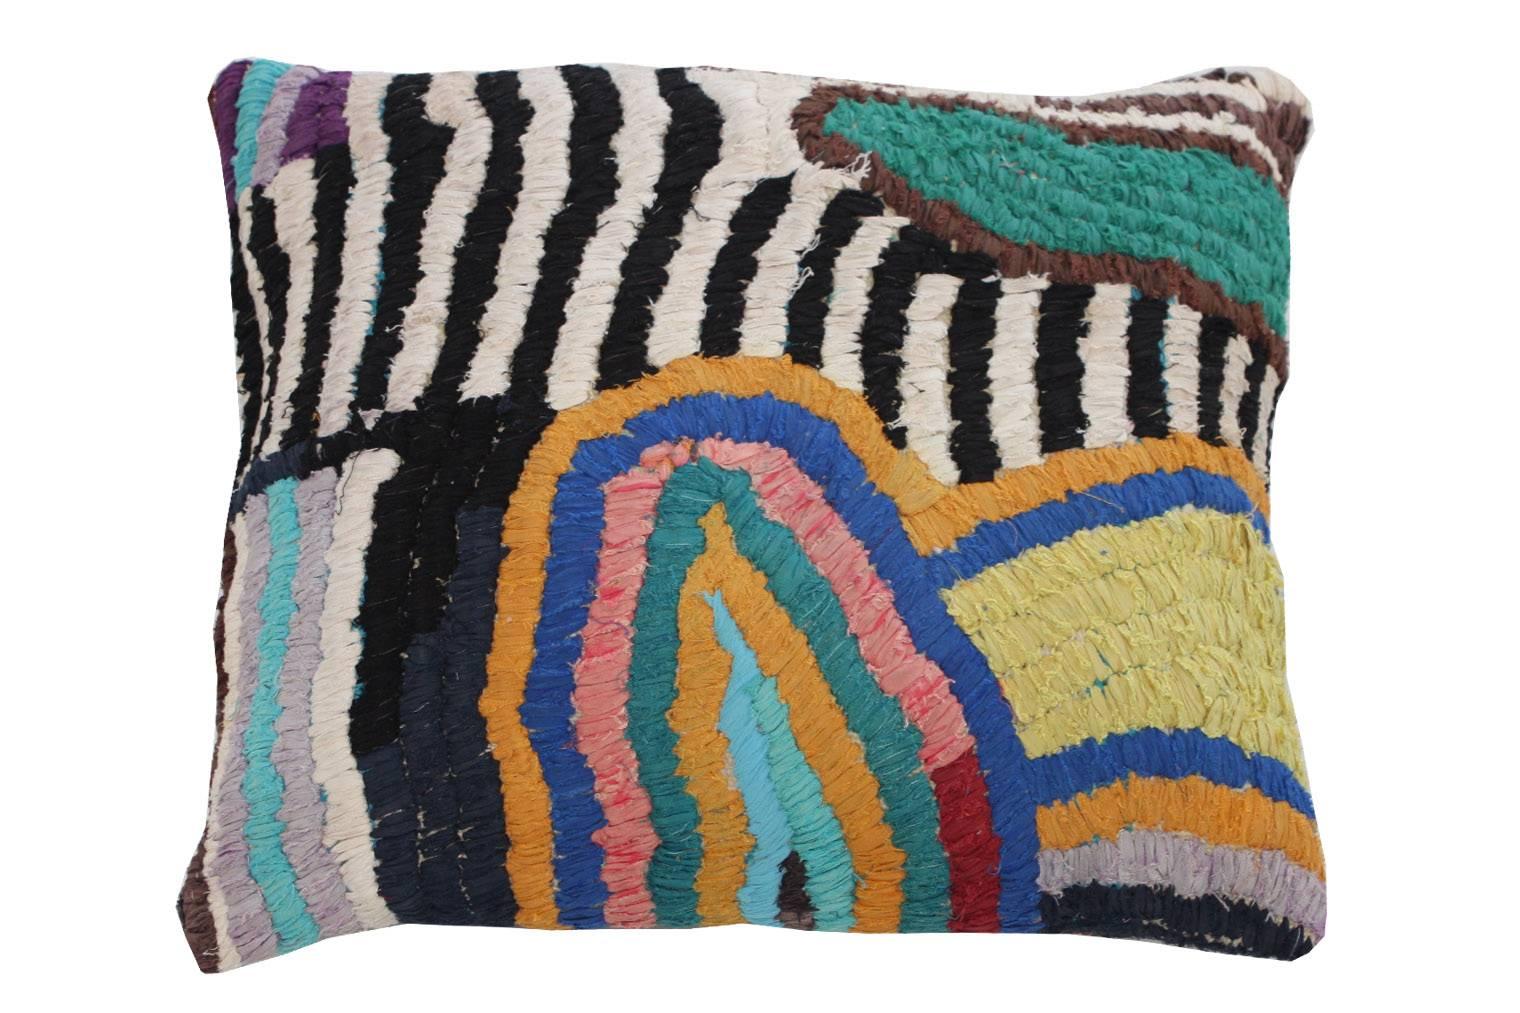 Floor pillow made with Moroccan vintage textile rug. 
This pillow is black, brown and cream with accents of pink, orange, aqua, blue, purple, chartreuse and red.
28" L x 25" W.